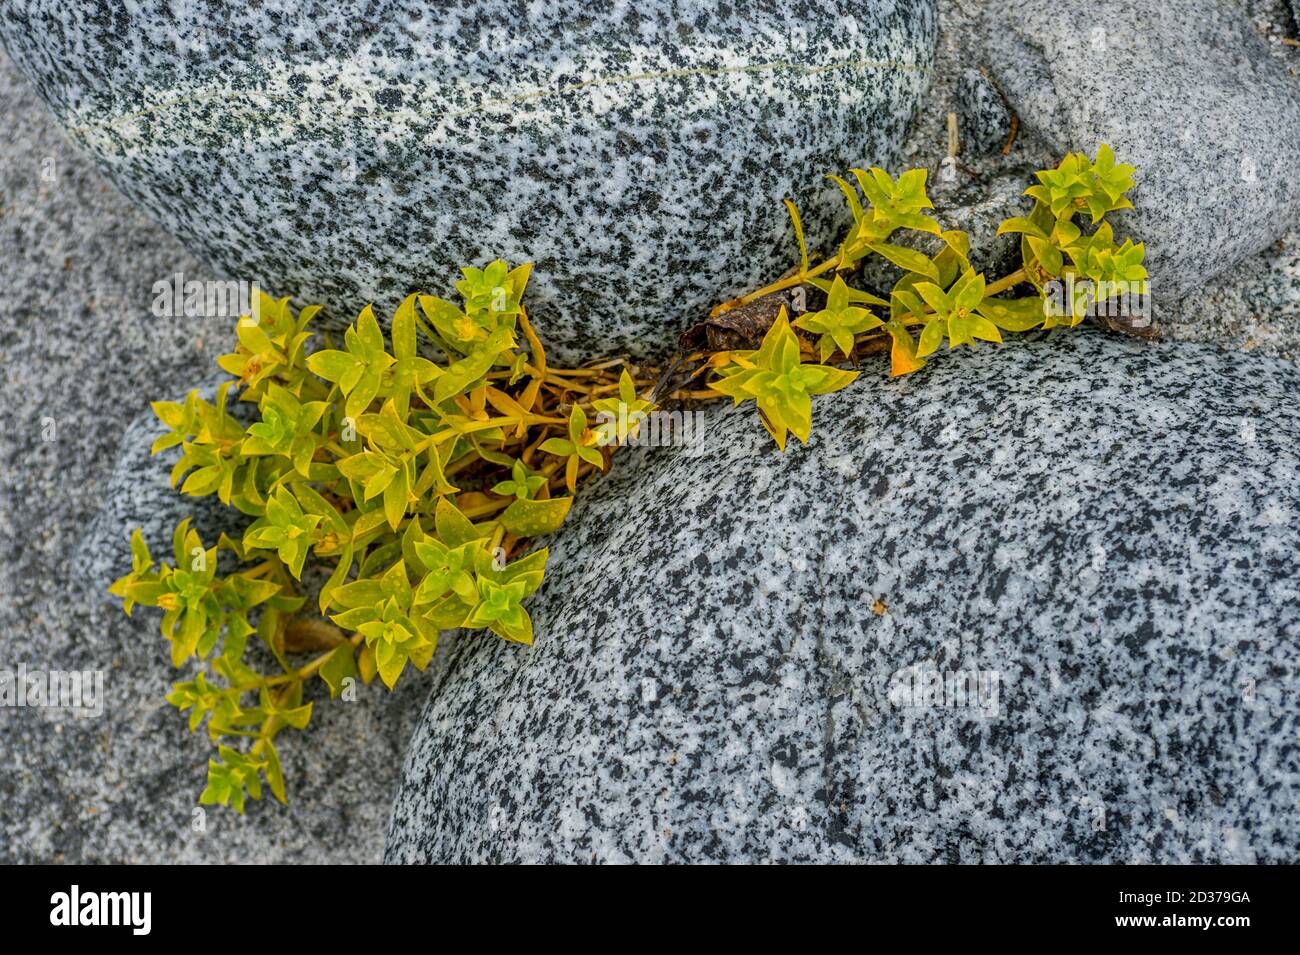 Plant life is slowly returning after the ice of glaciers melt as seen here at Baird Glacier in Scenery Cove, Thomas Bay, Tongass National Forest, Alas Stock Photo